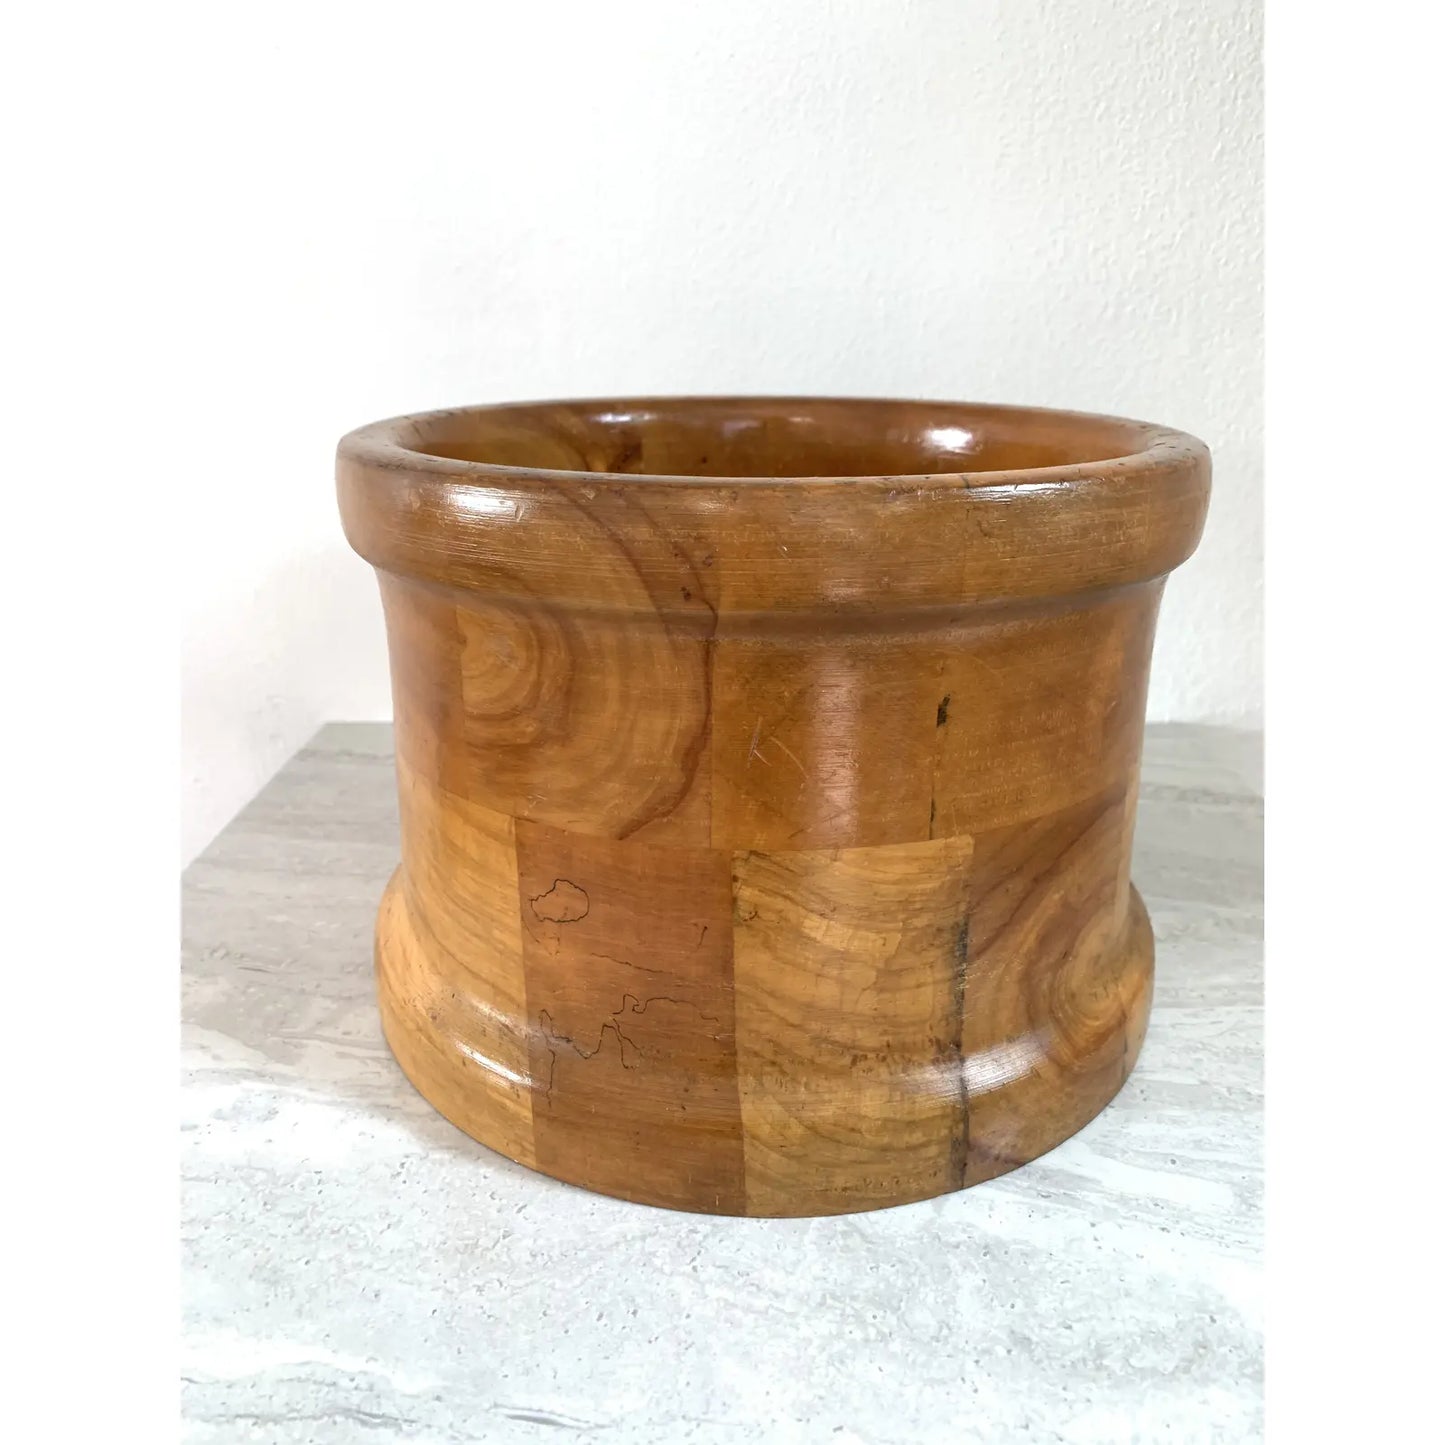 Early 20th Century Handcrafted Rustic Solid Wood Bowl